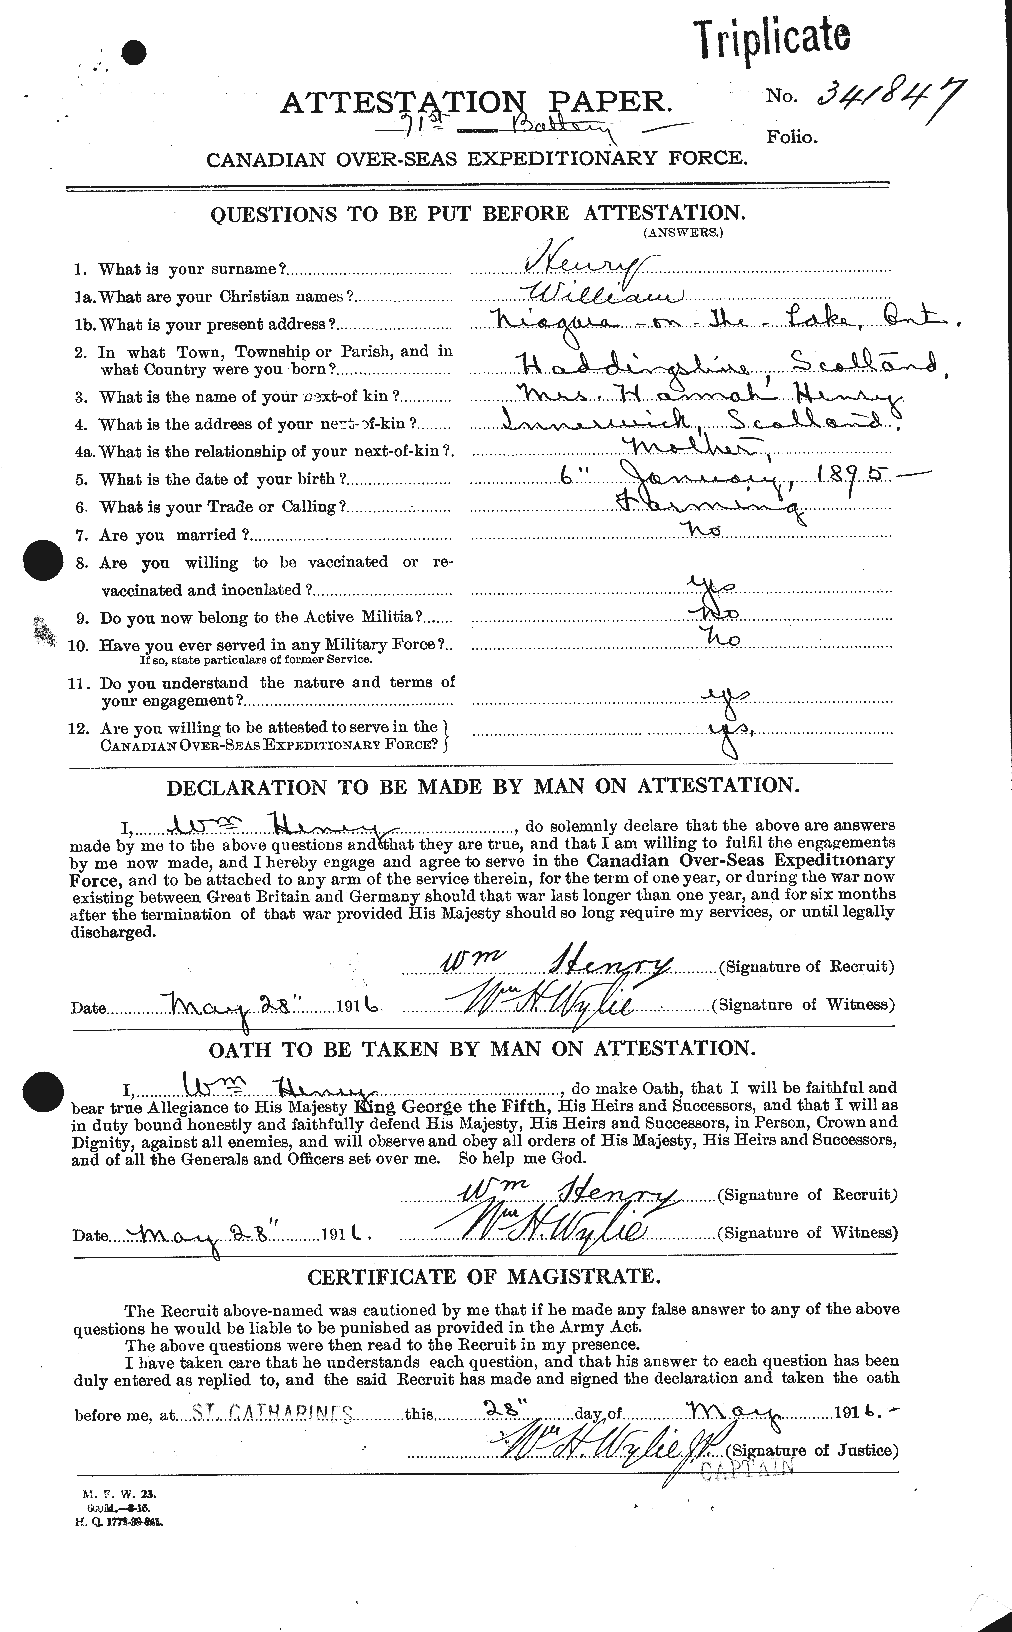 Personnel Records of the First World War - CEF 387746a